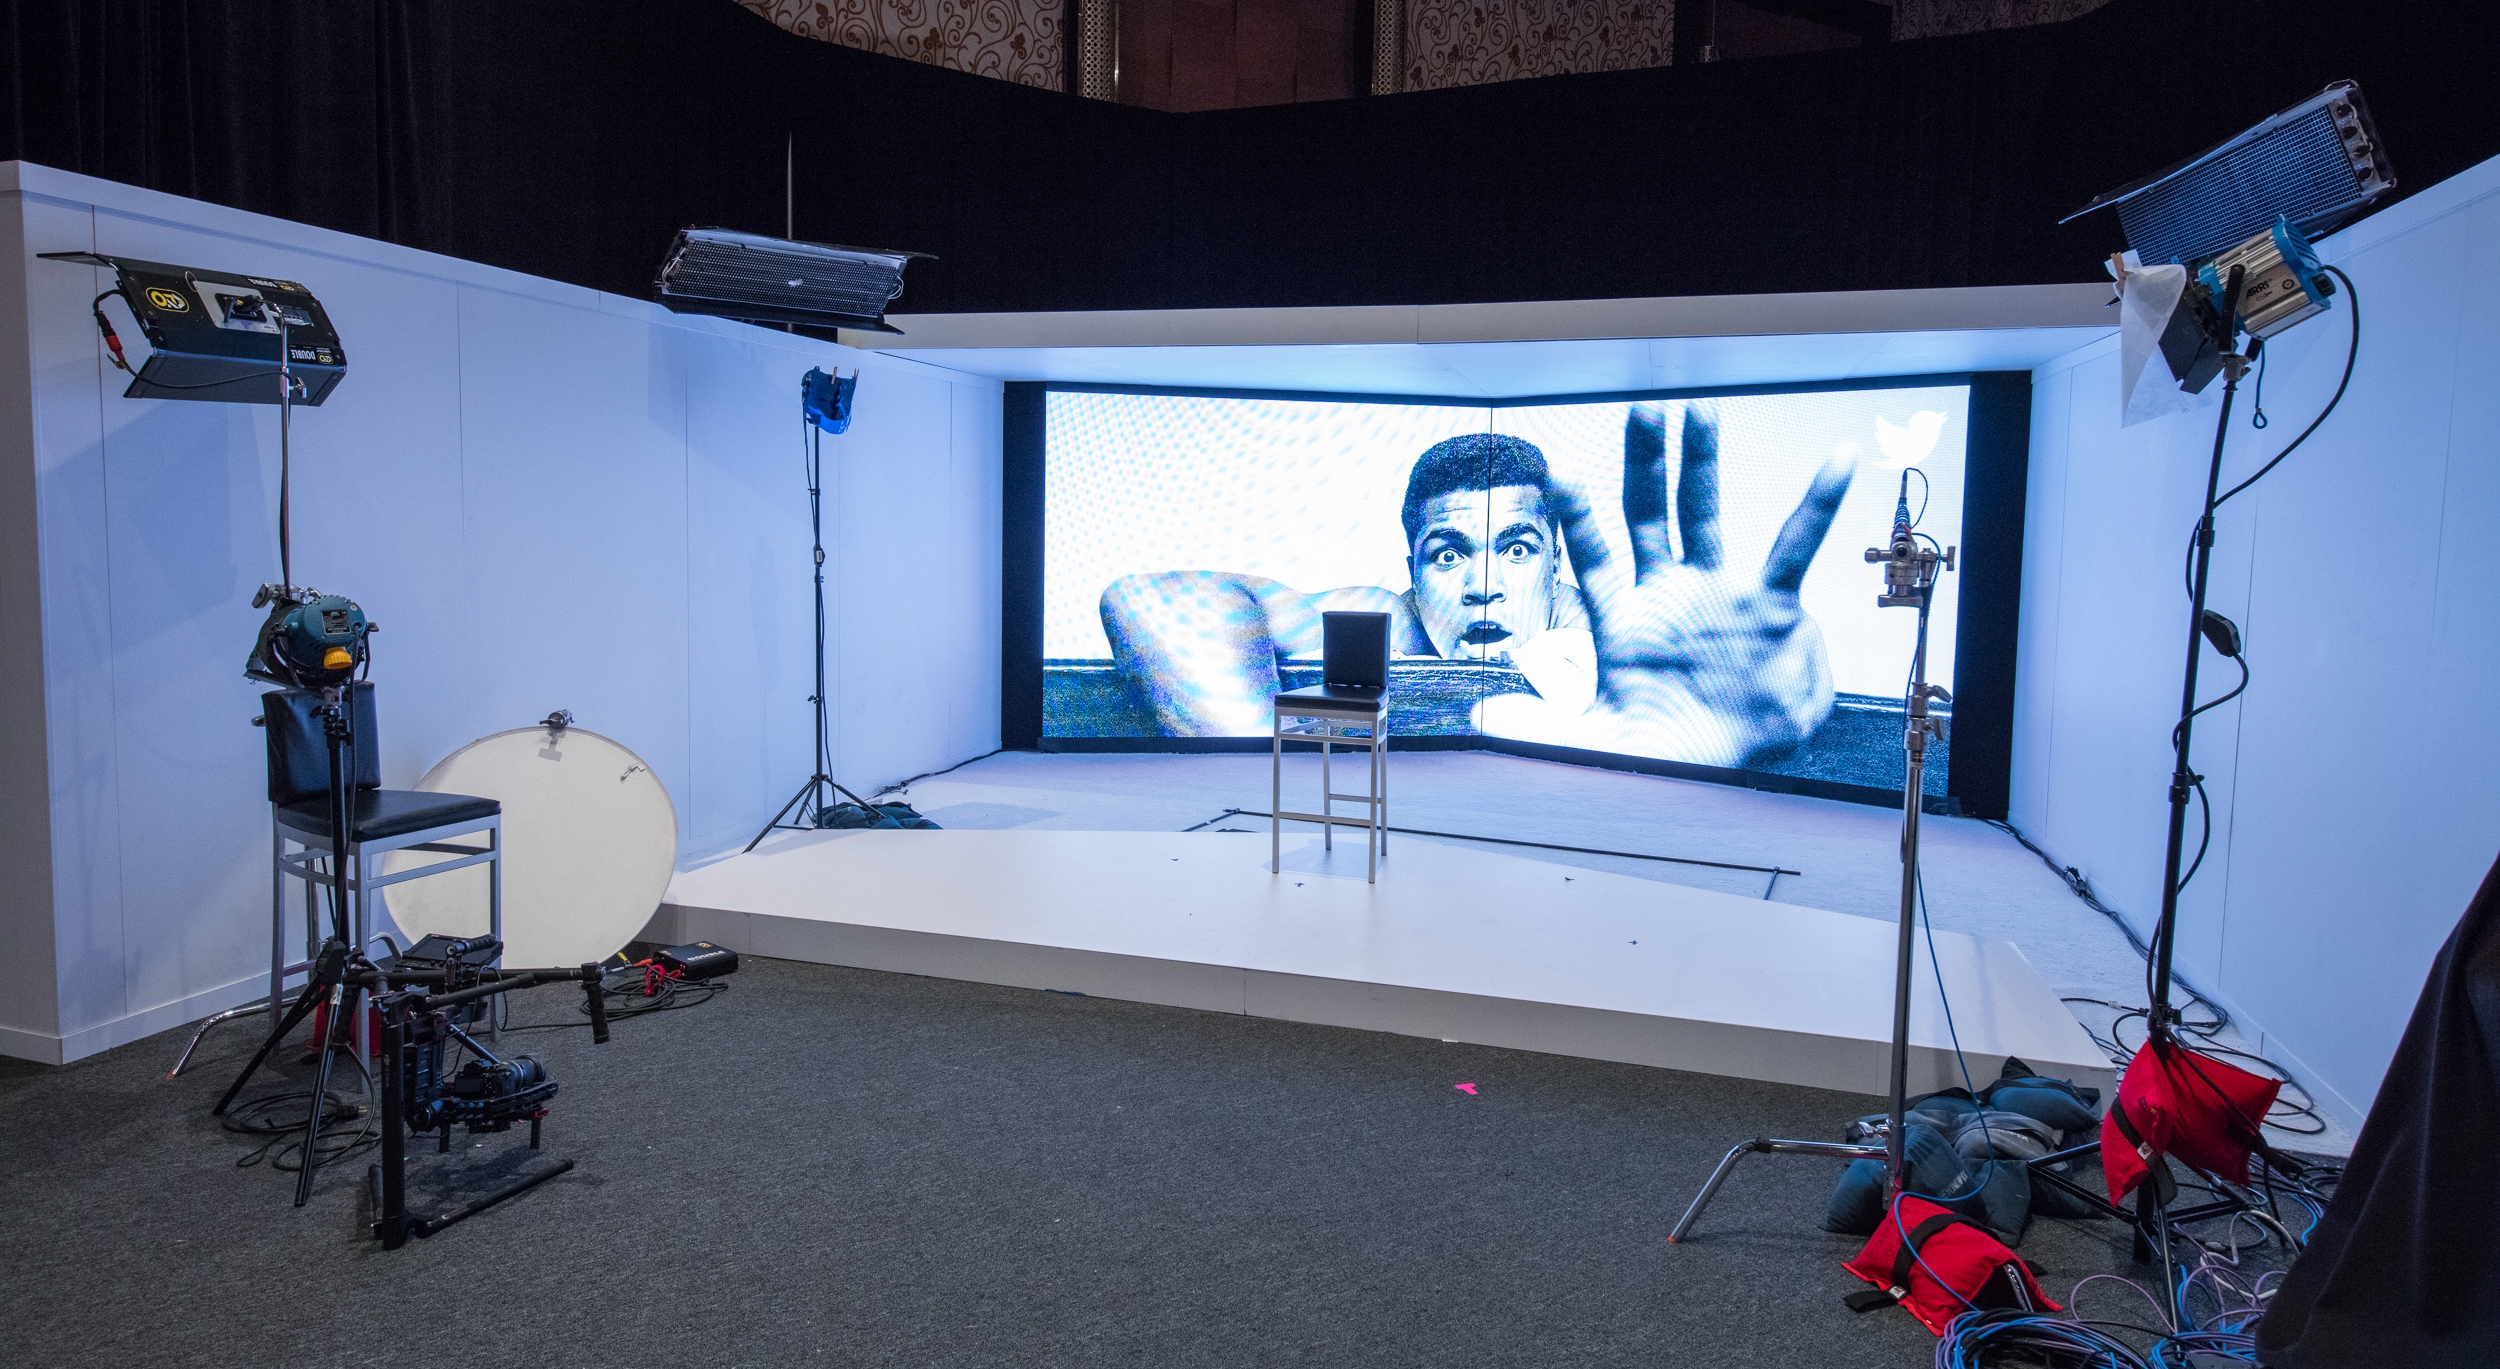  The Live Studio space was used to interview Twitter Influencers such as Rick Ross, Joe Montana, and Jayanta Jenkins.&nbsp;      All photos were taken by John Carmichael.&nbsp;  